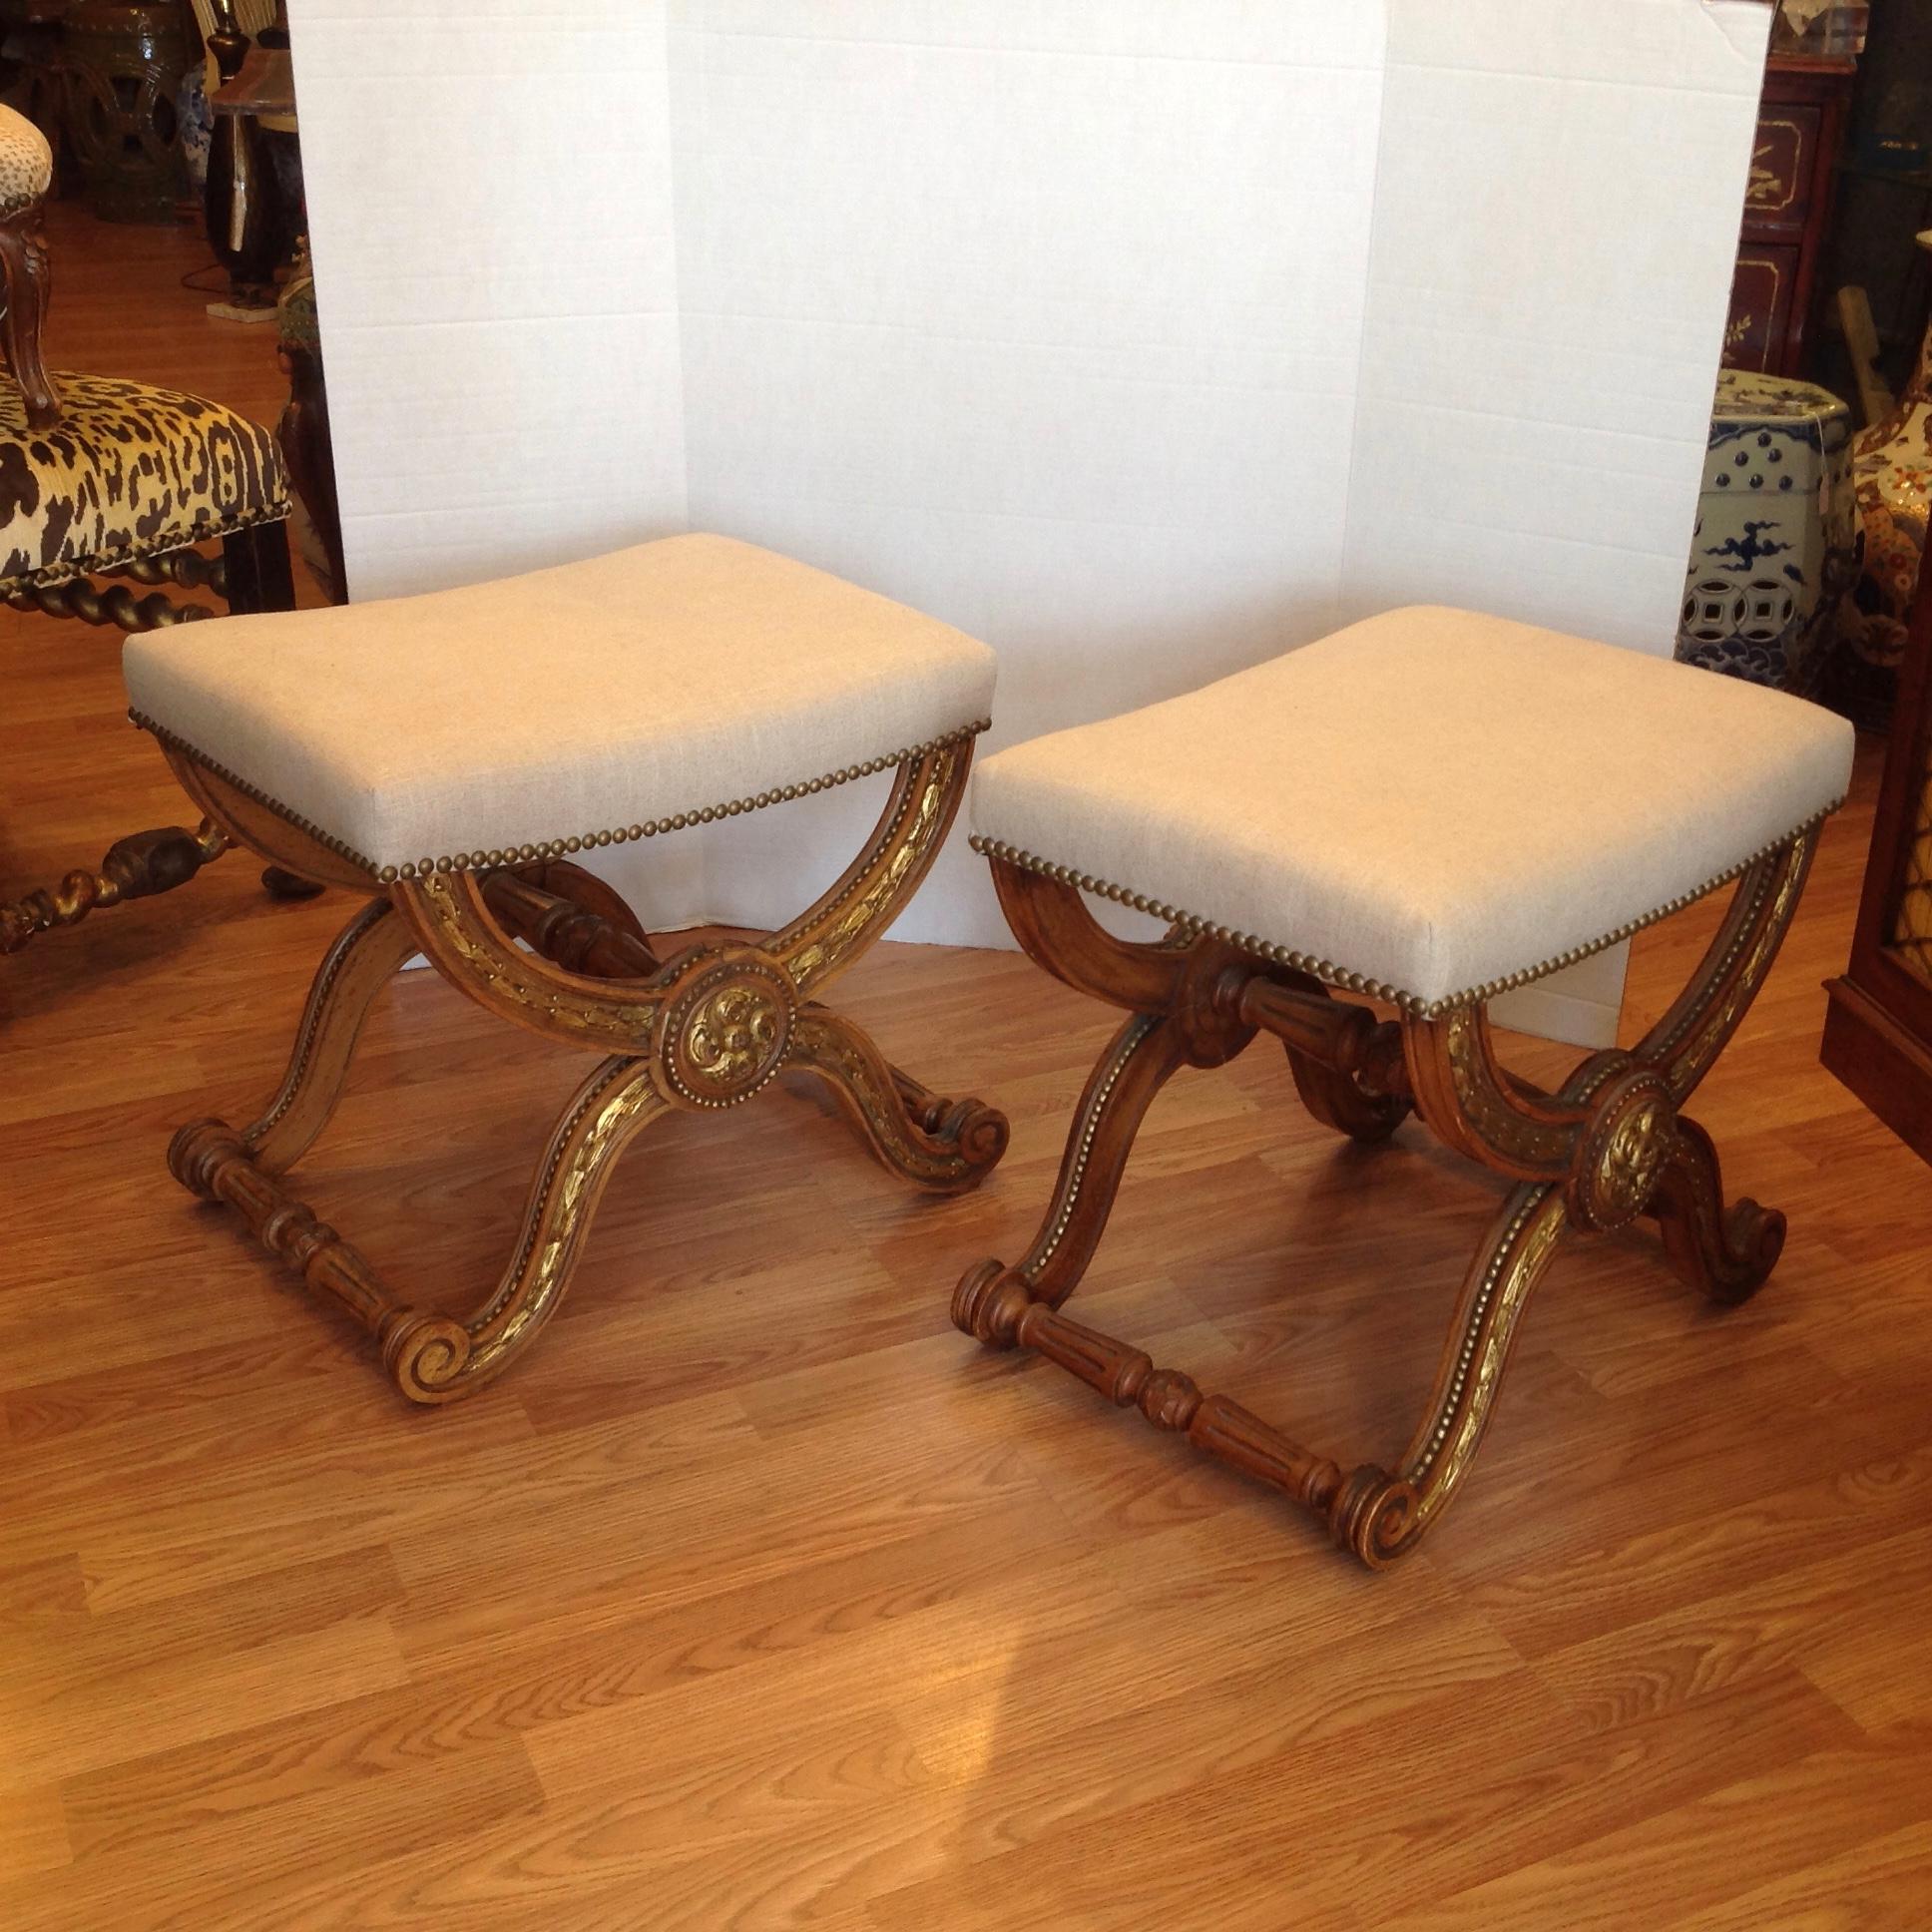 Upholstery Pair of Italian Parcel-Gilt Benches